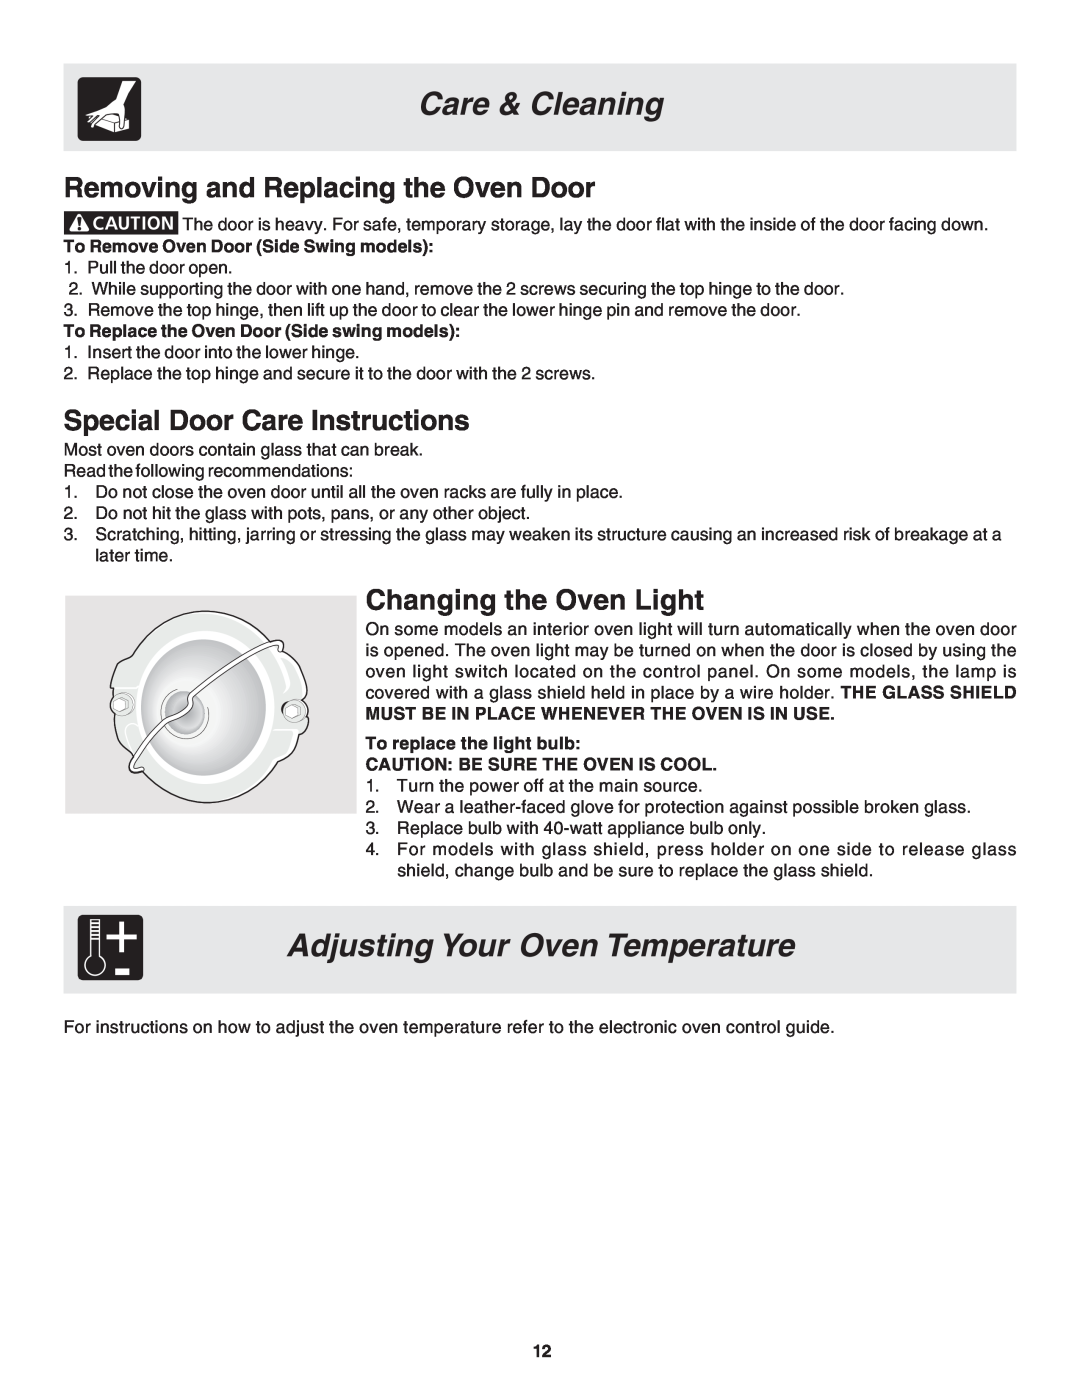 Frigidaire 318205121 Adjusting Your Oven Temperature, Removing and Replacing the Oven Door, Special Door Care Instructions 